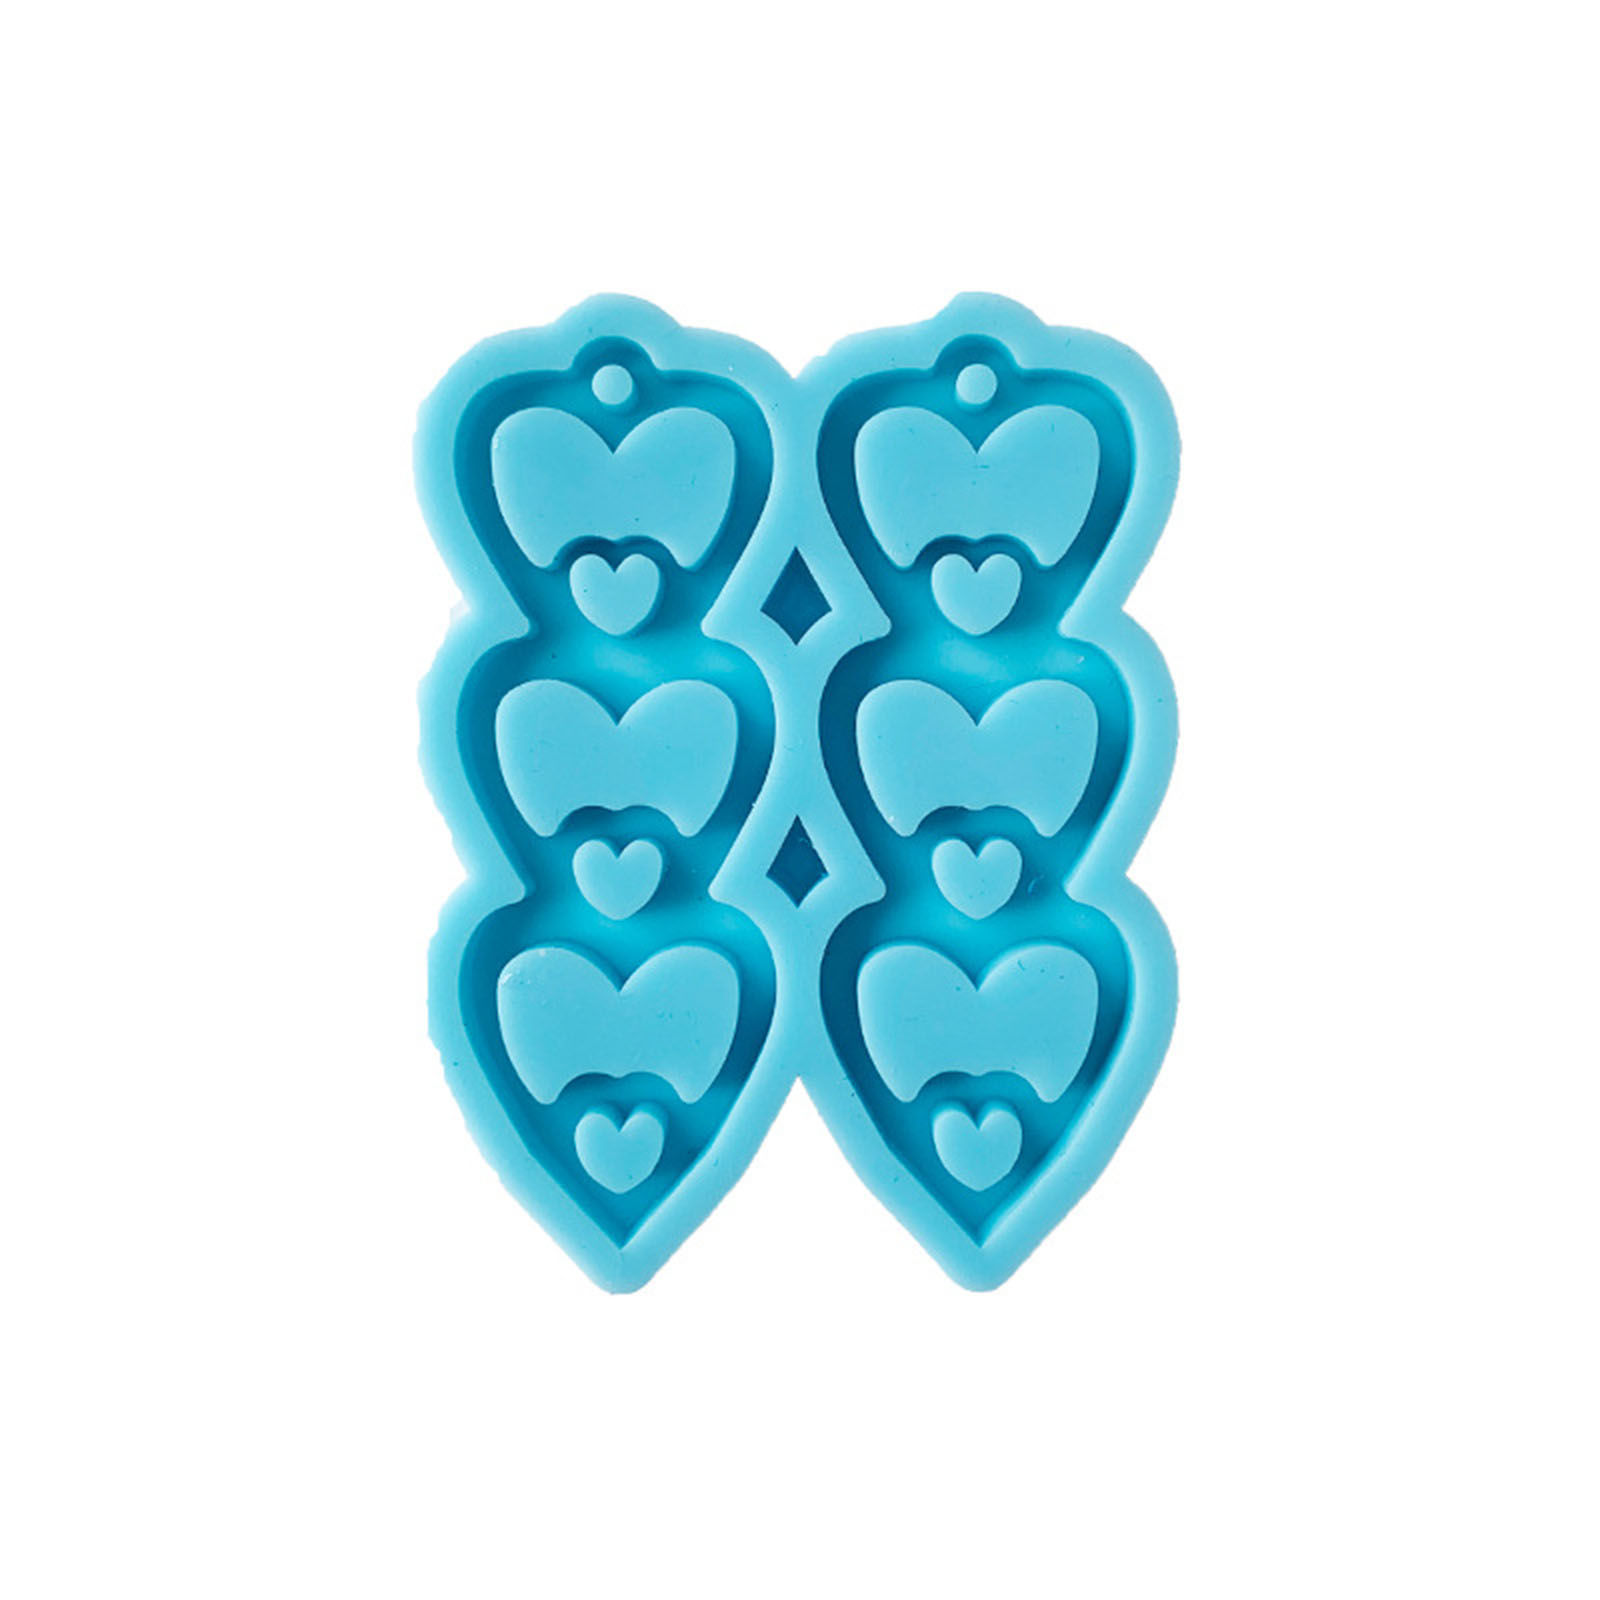 Picture of Silicone Resin Mold For Jewelry Making Pendant Earrings Keychain Heart Blue 7cm x 5.4cm, 1 Piece